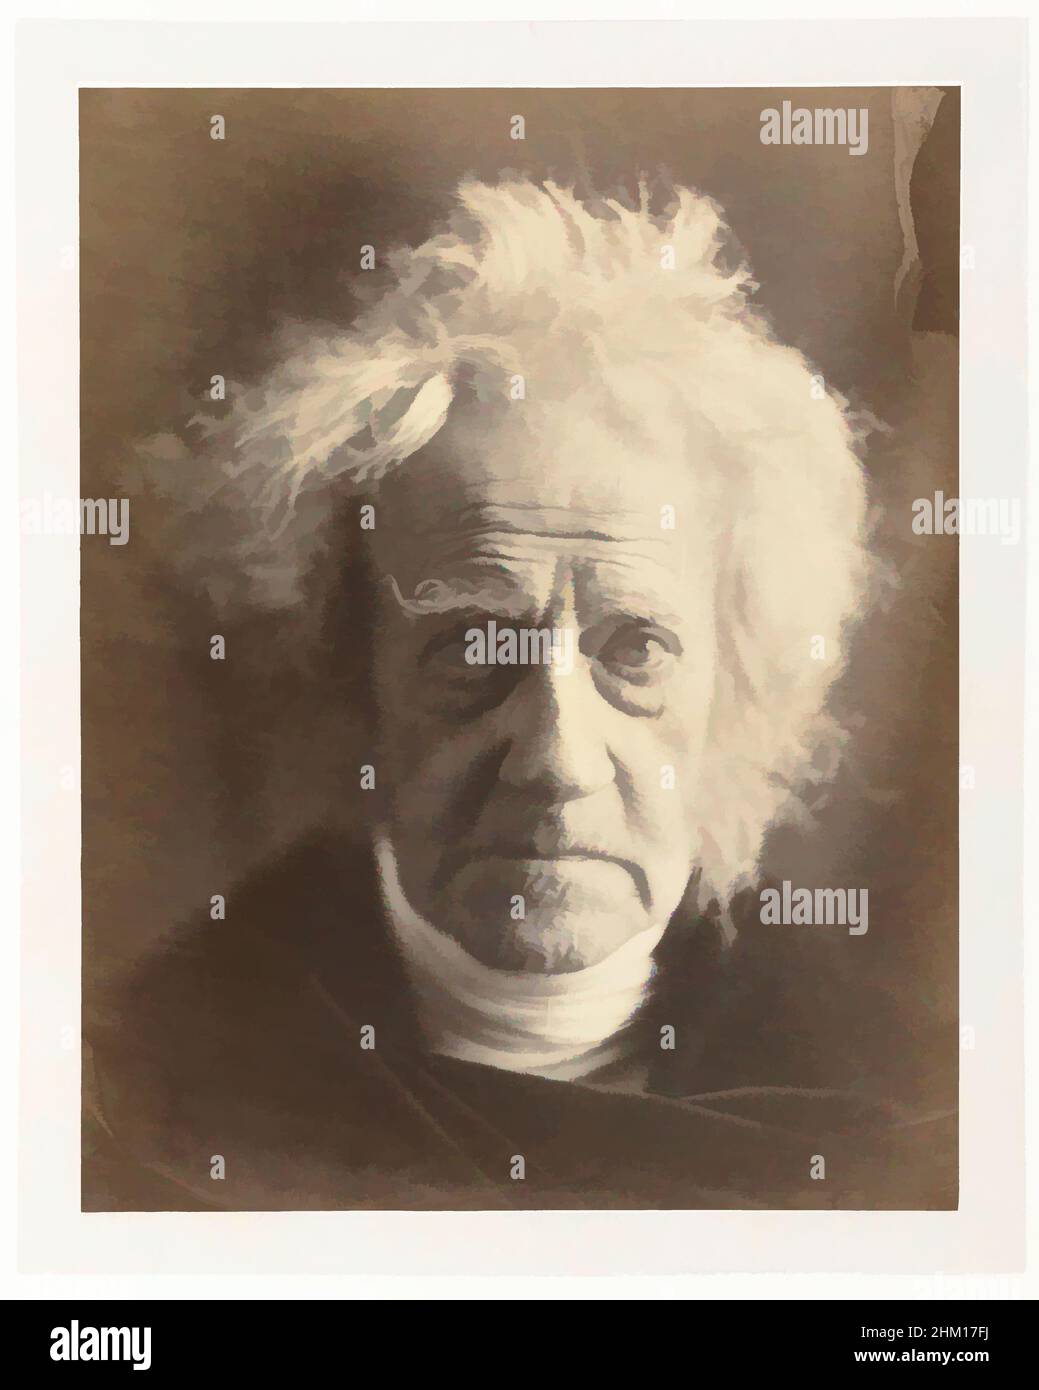 Art inspired by Portrait of the astronomer Sir John Herschel, J.F.W. Herschel, Julia Margaret Cameron, Kent, 1867, paper, cardboard, albumen print, height 355 mm × width 279 mmheight 537 mm × width 434 mm, Classic works modernized by Artotop with a splash of modernity. Shapes, color and value, eye-catching visual impact on art. Emotions through freedom of artworks in a contemporary way. A timeless message pursuing a wildly creative new direction. Artists turning to the digital medium and creating the Artotop NFT Stock Photo